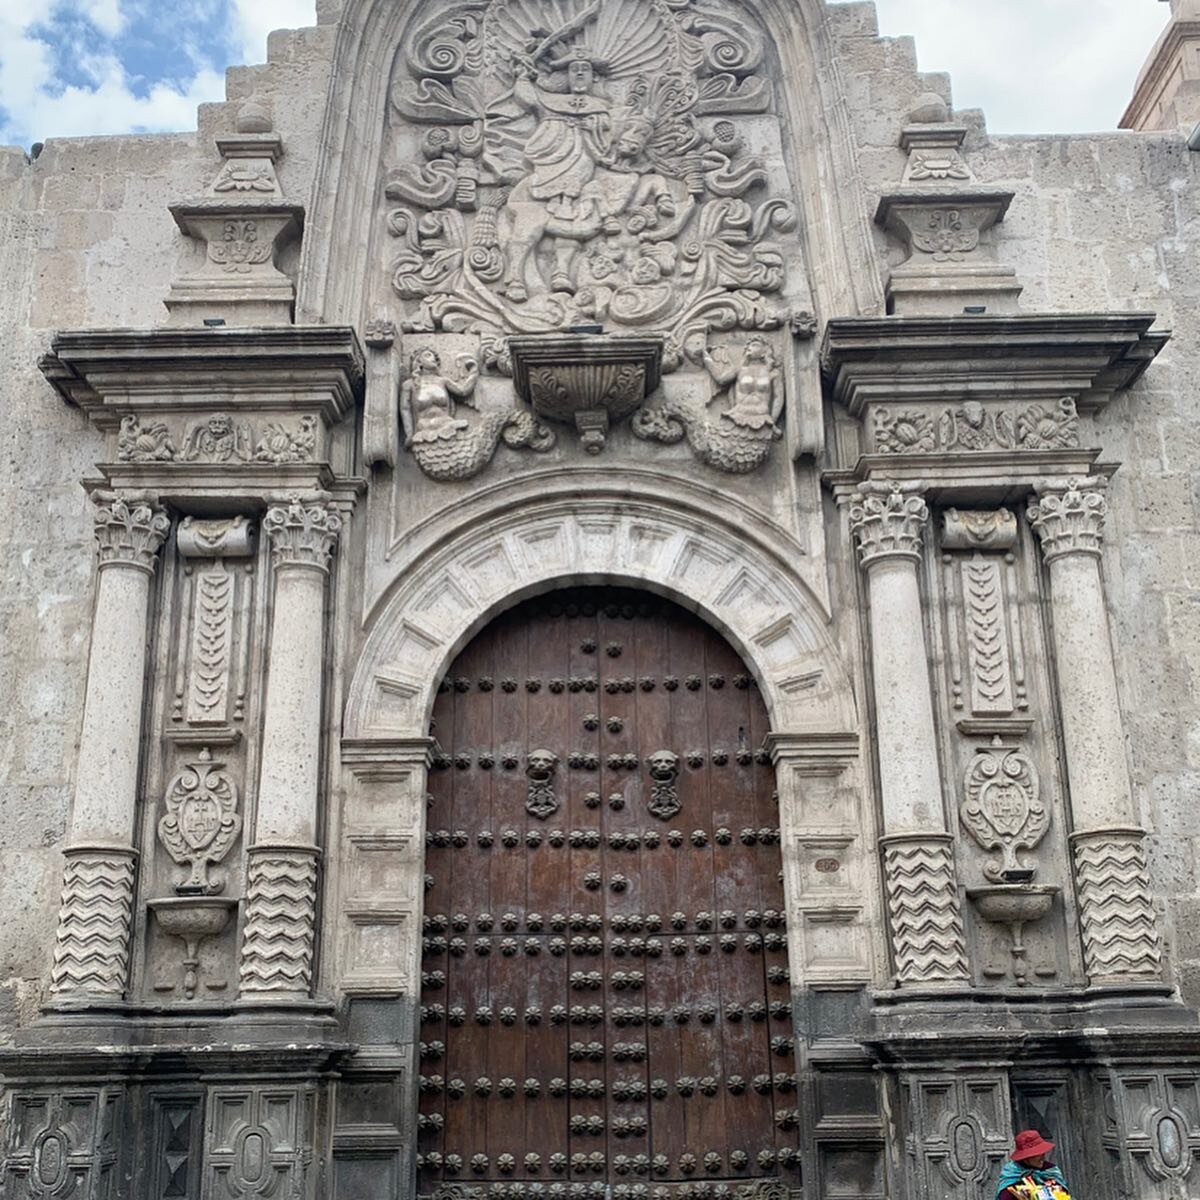 One for @r.jarv , doors of Arequipa. Enjoy!